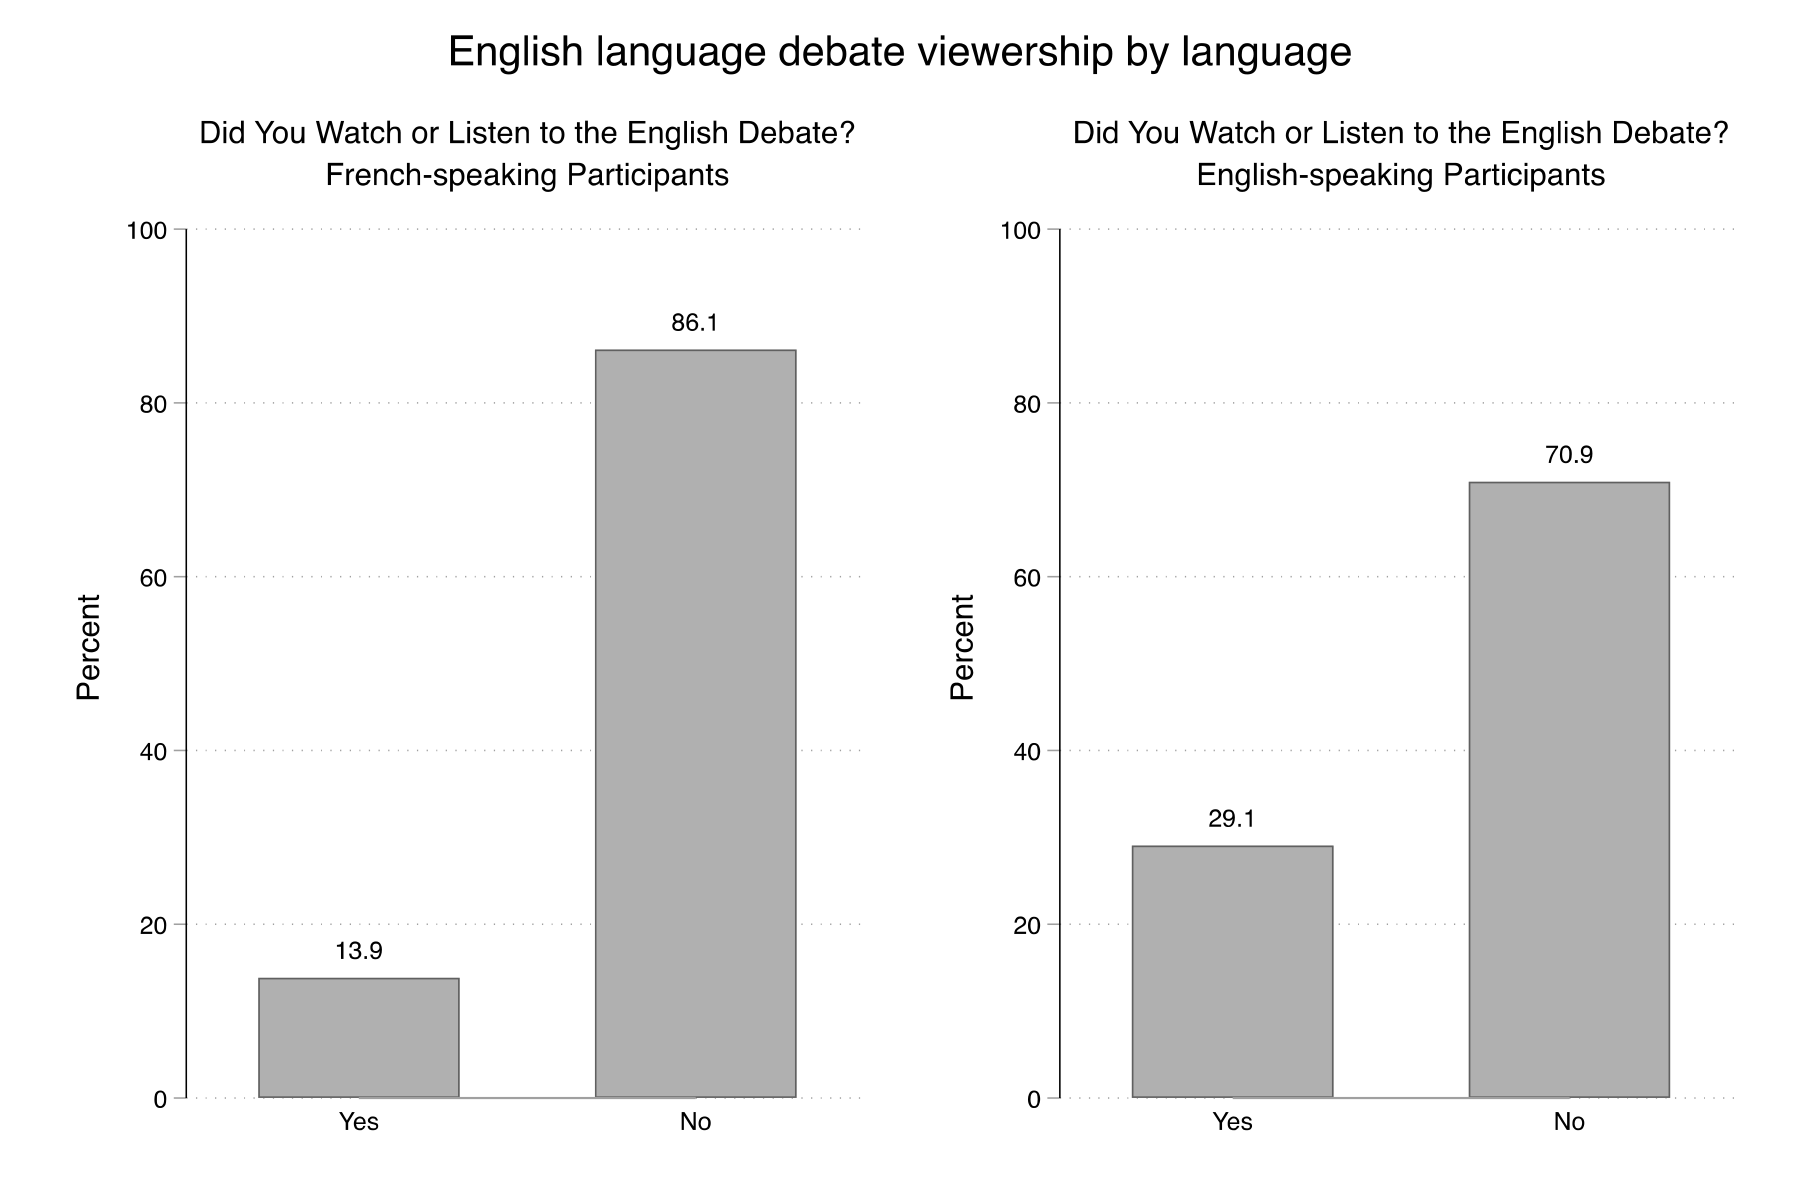 Figure 7. This figure shows the viewership of the English debate by language. It shows that 29% of English speakers, and 14% of French-speakers, watched the English debate.